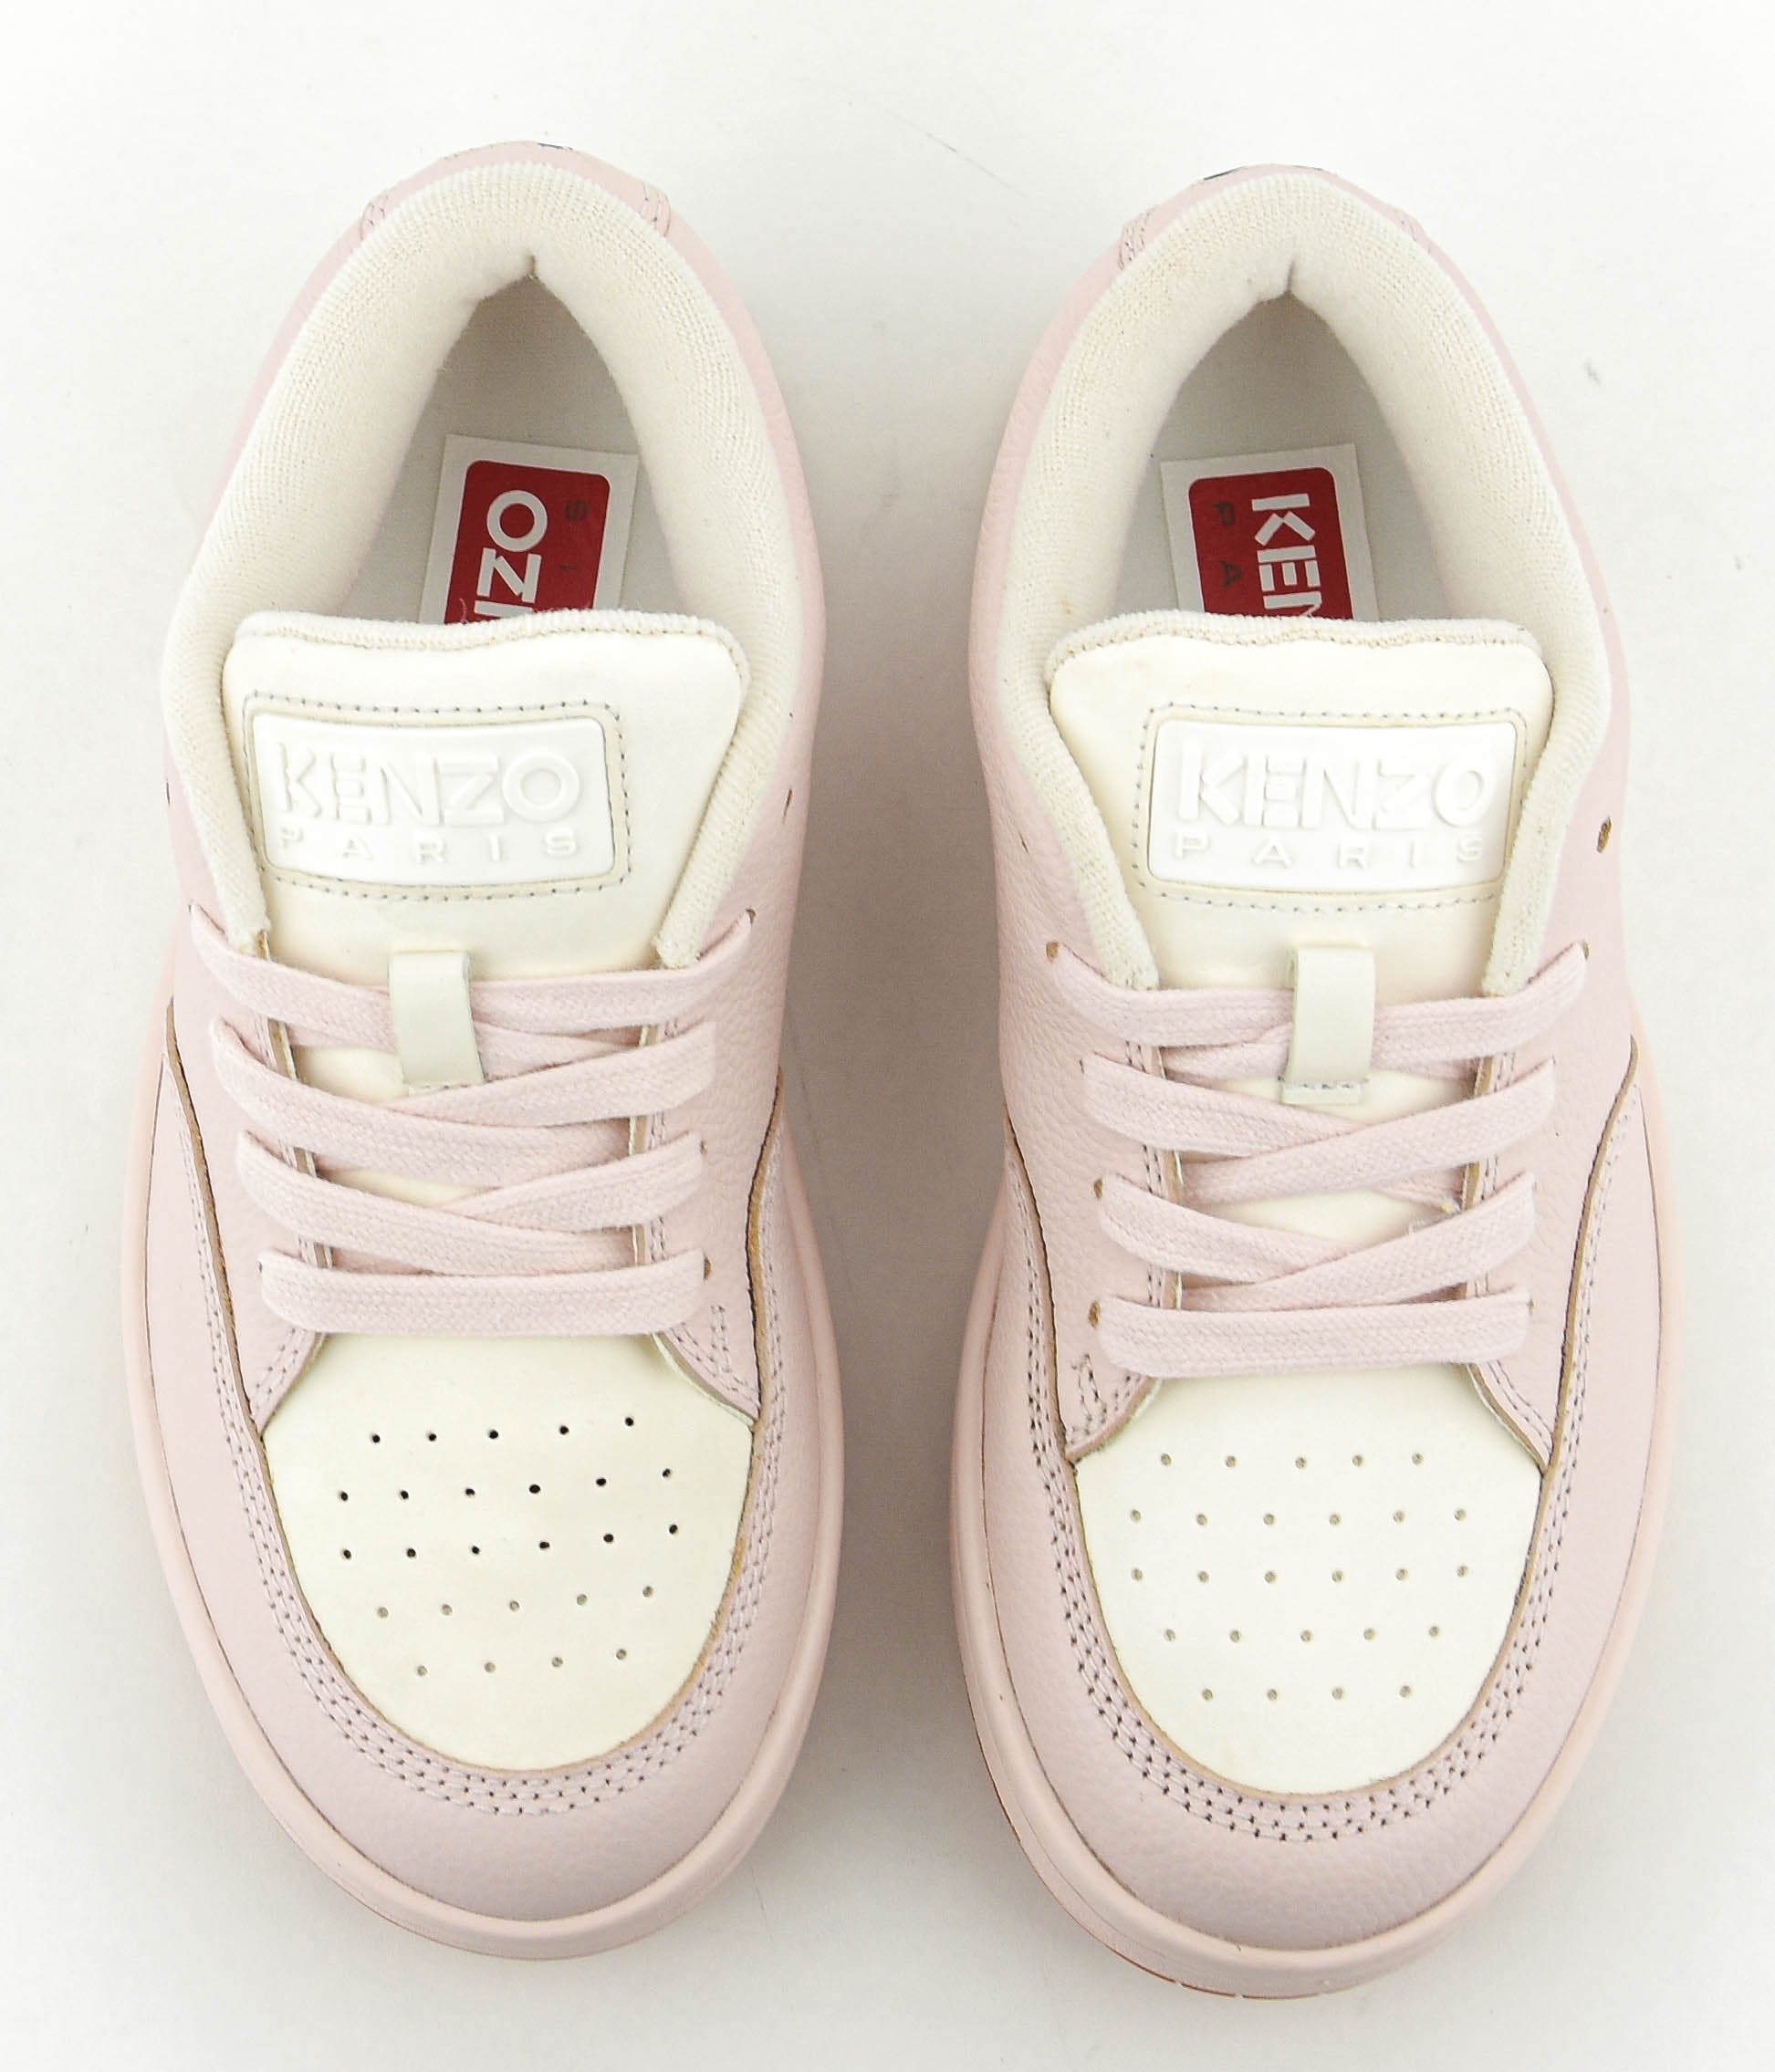 KENZO DOME TRAINER PINK